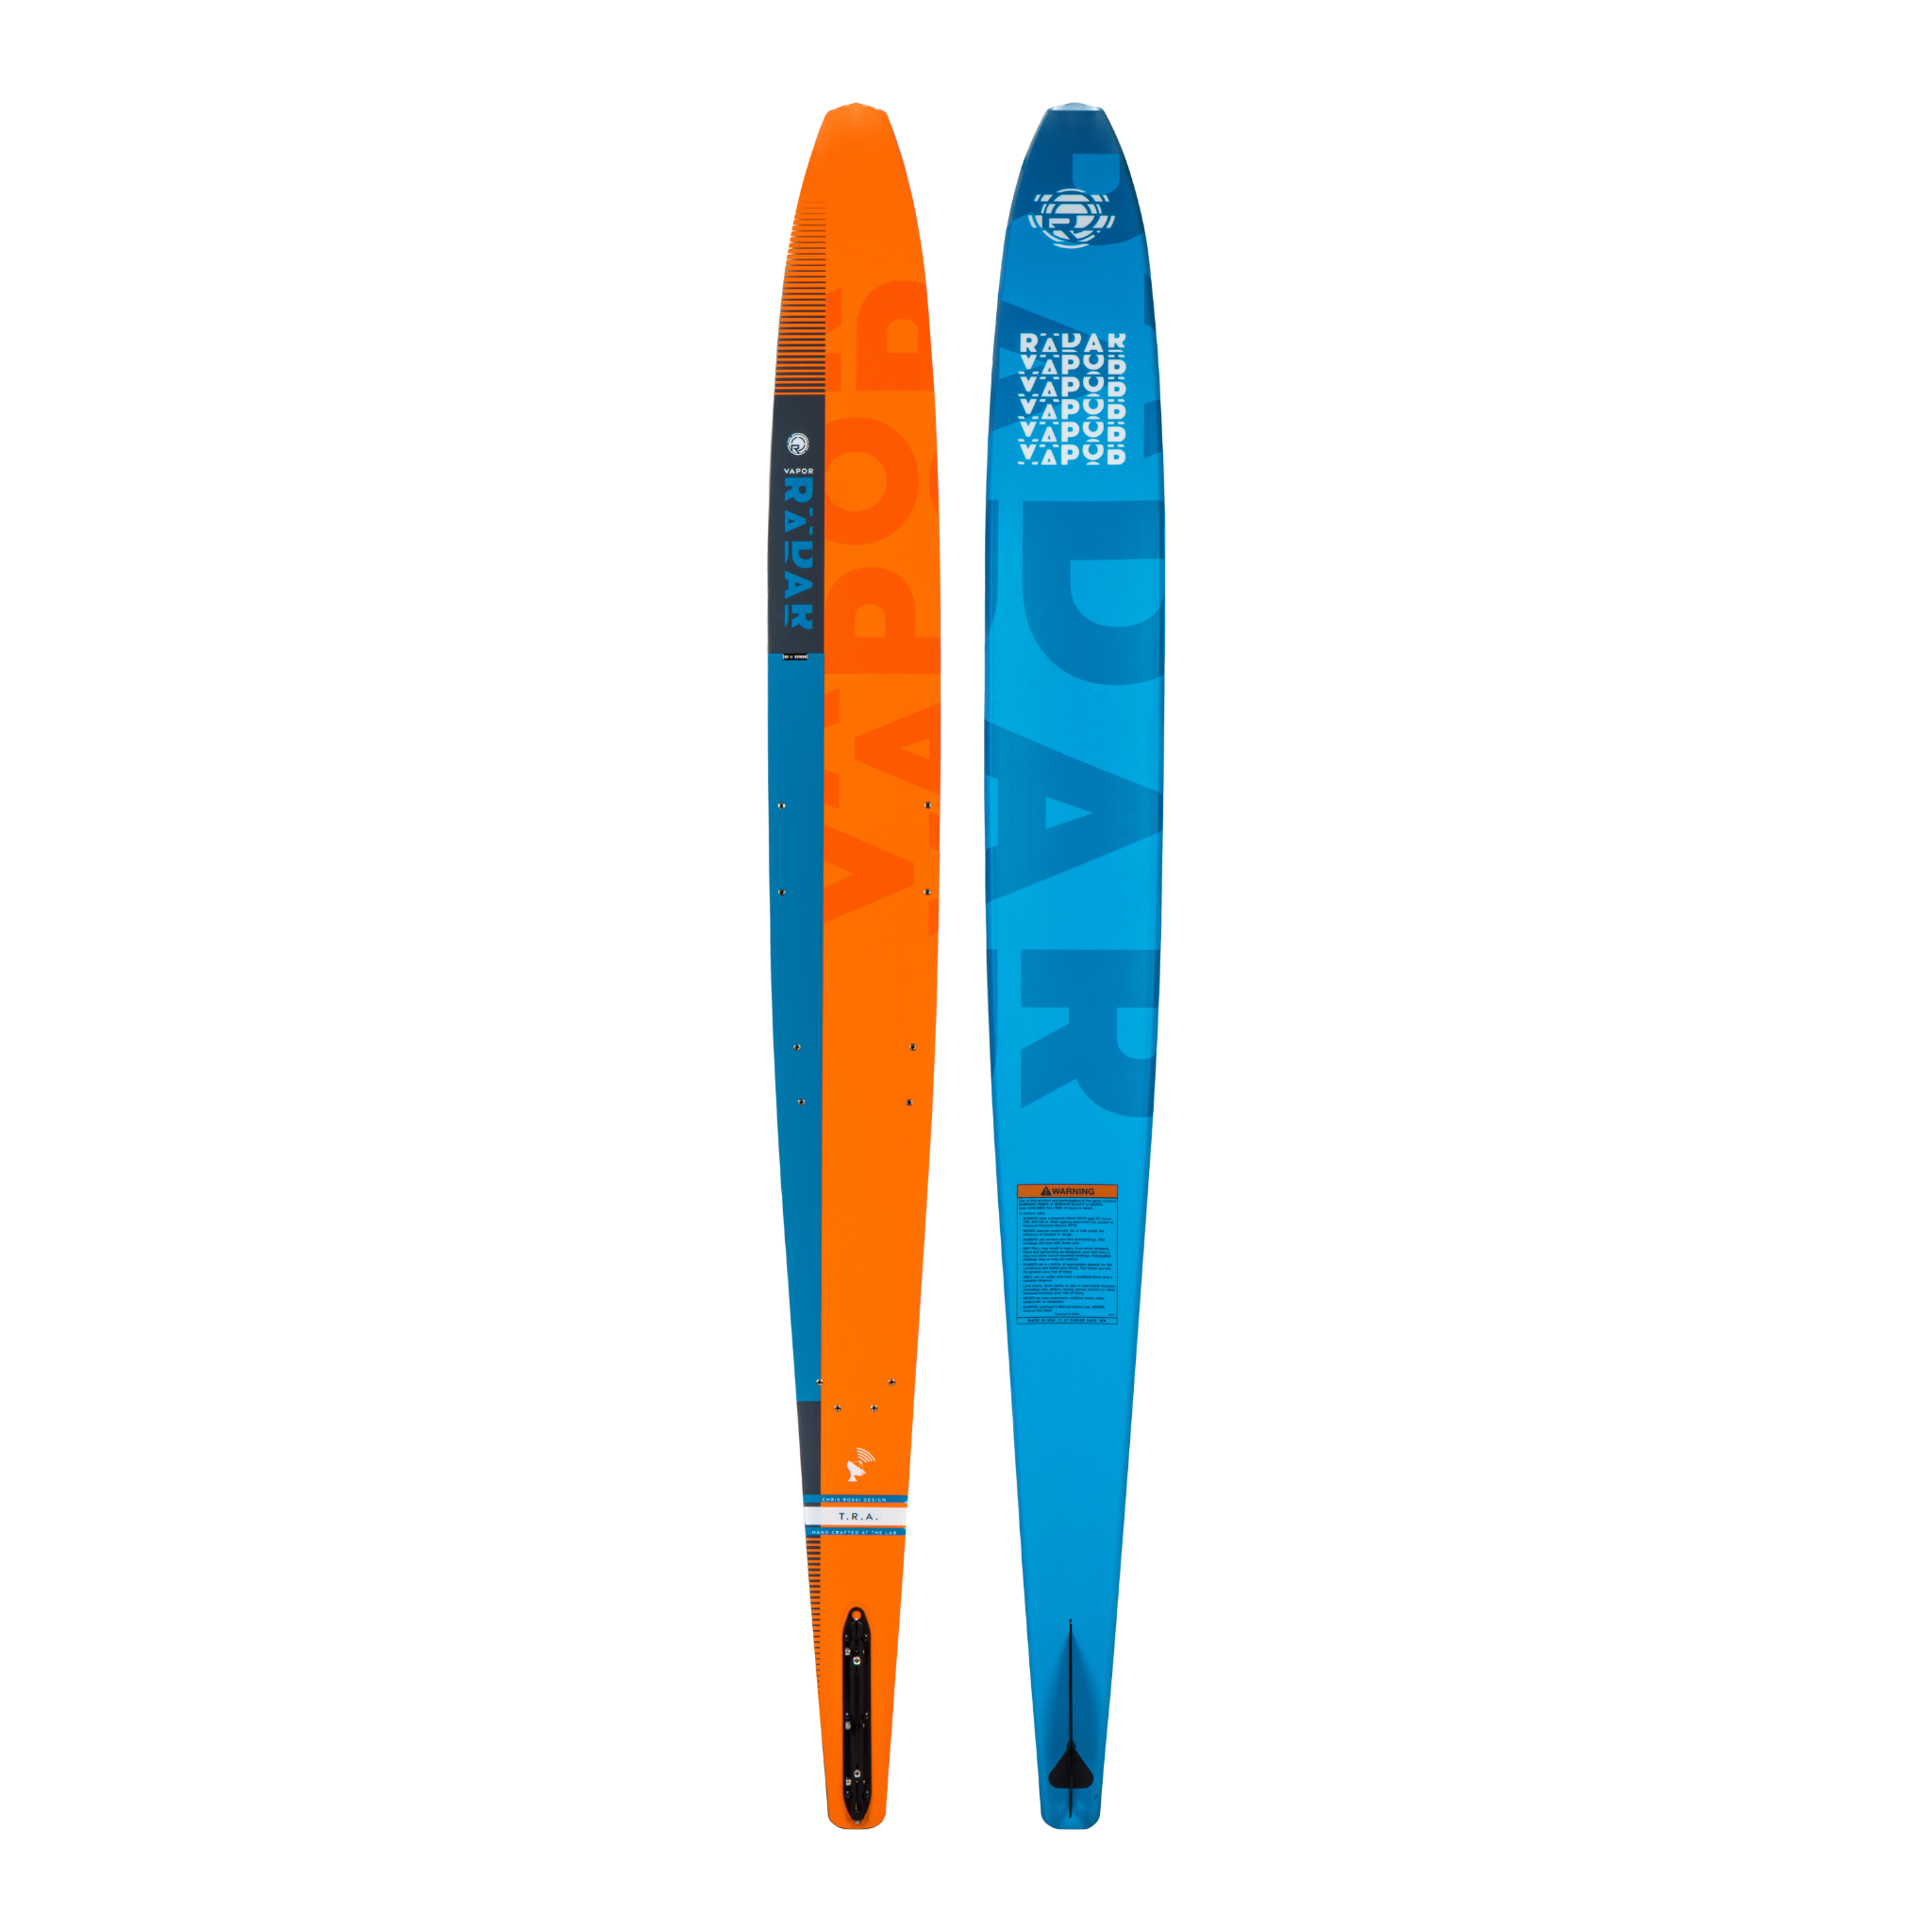 Cameo 3.0 - Women's CGA Life Vest  Radar Skis, Handcrafted Quality  Waterskis